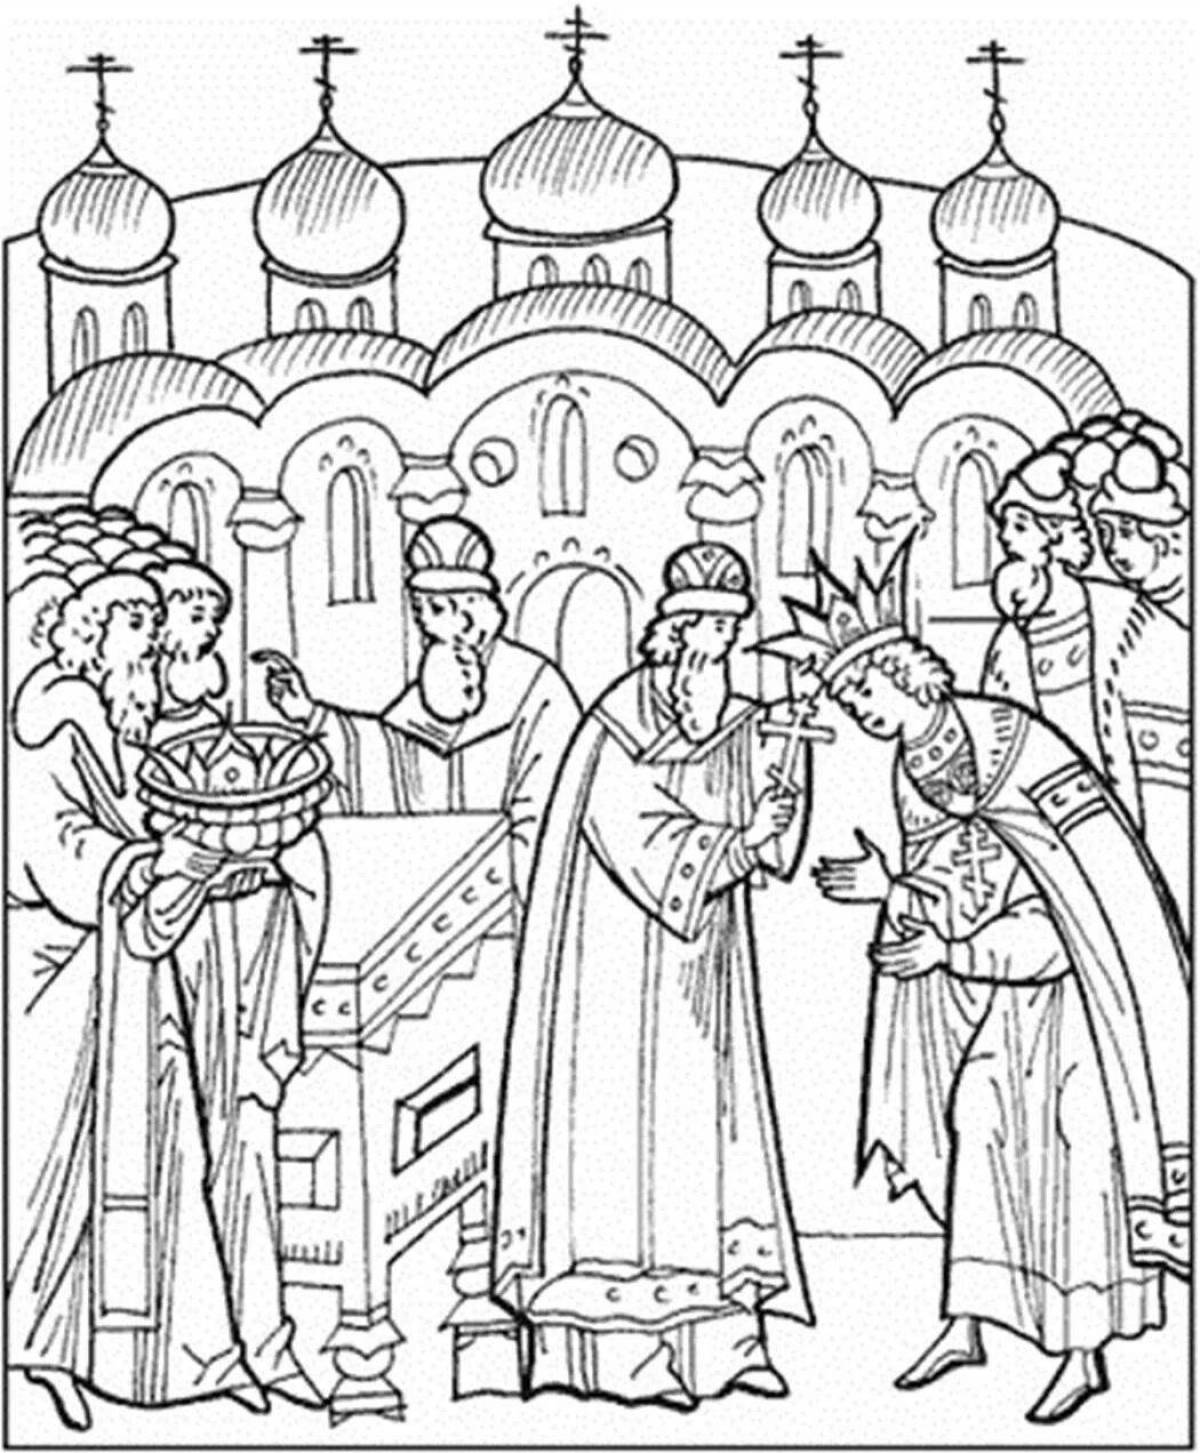 Coloring page grandiose ivan the terrible